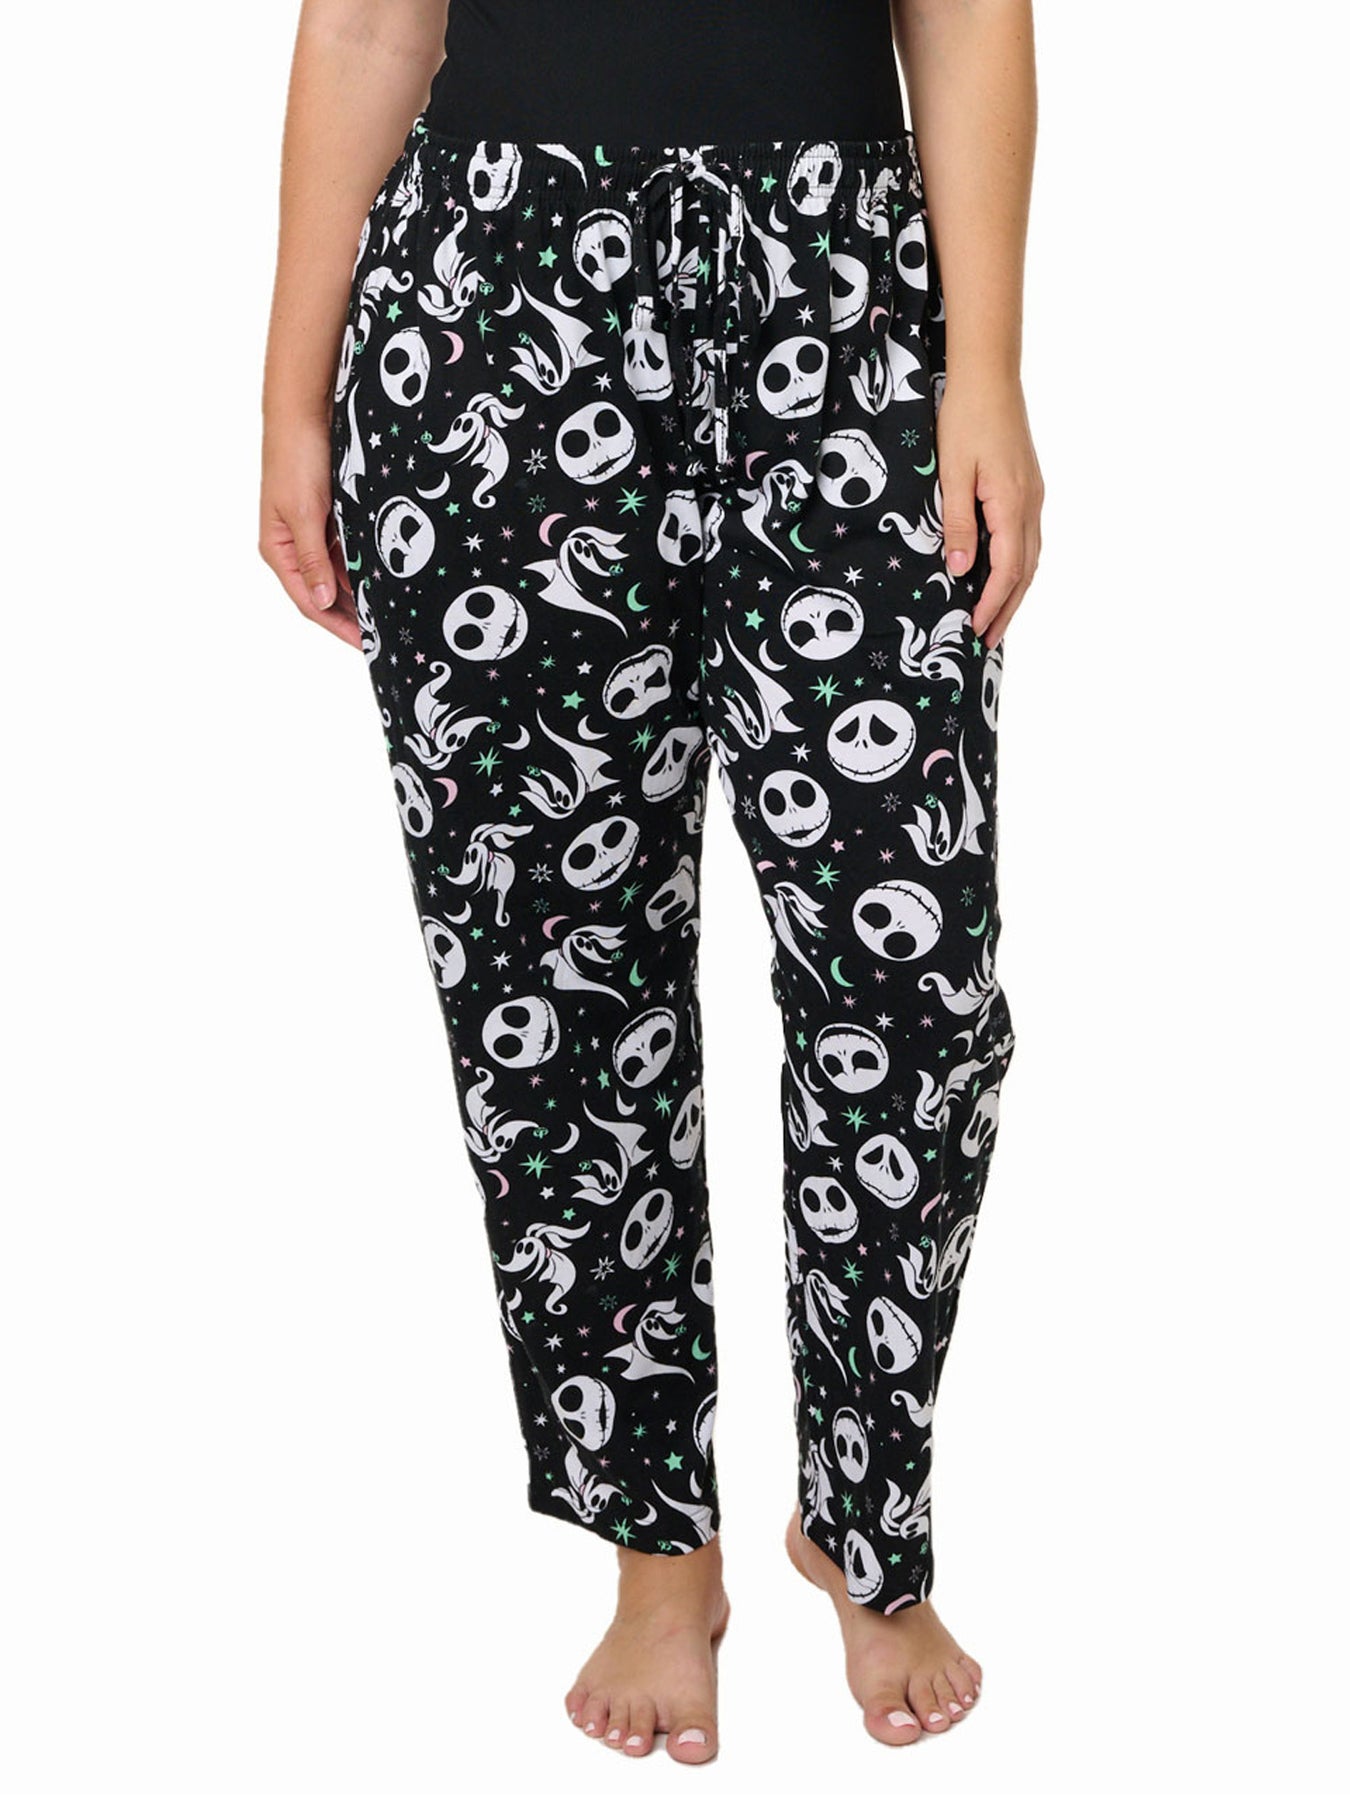 Stars Above Women's Pajama Bottoms Only (MSRP: $29.99)